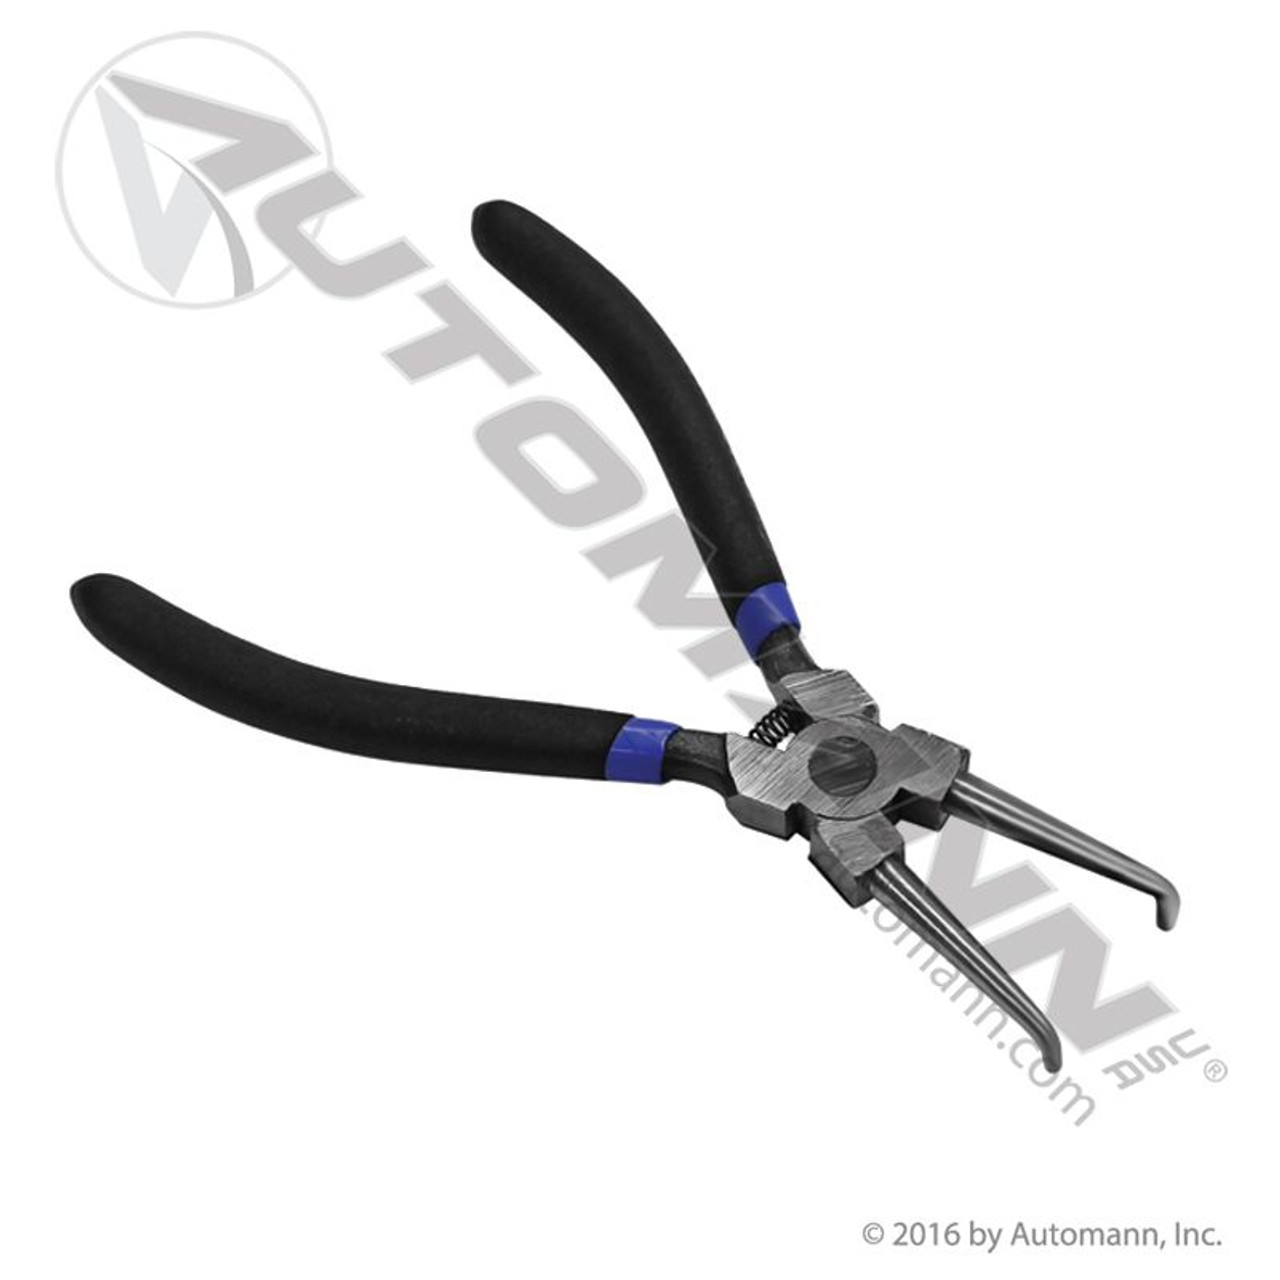 Spindle Nut Retaining Ring Pliers